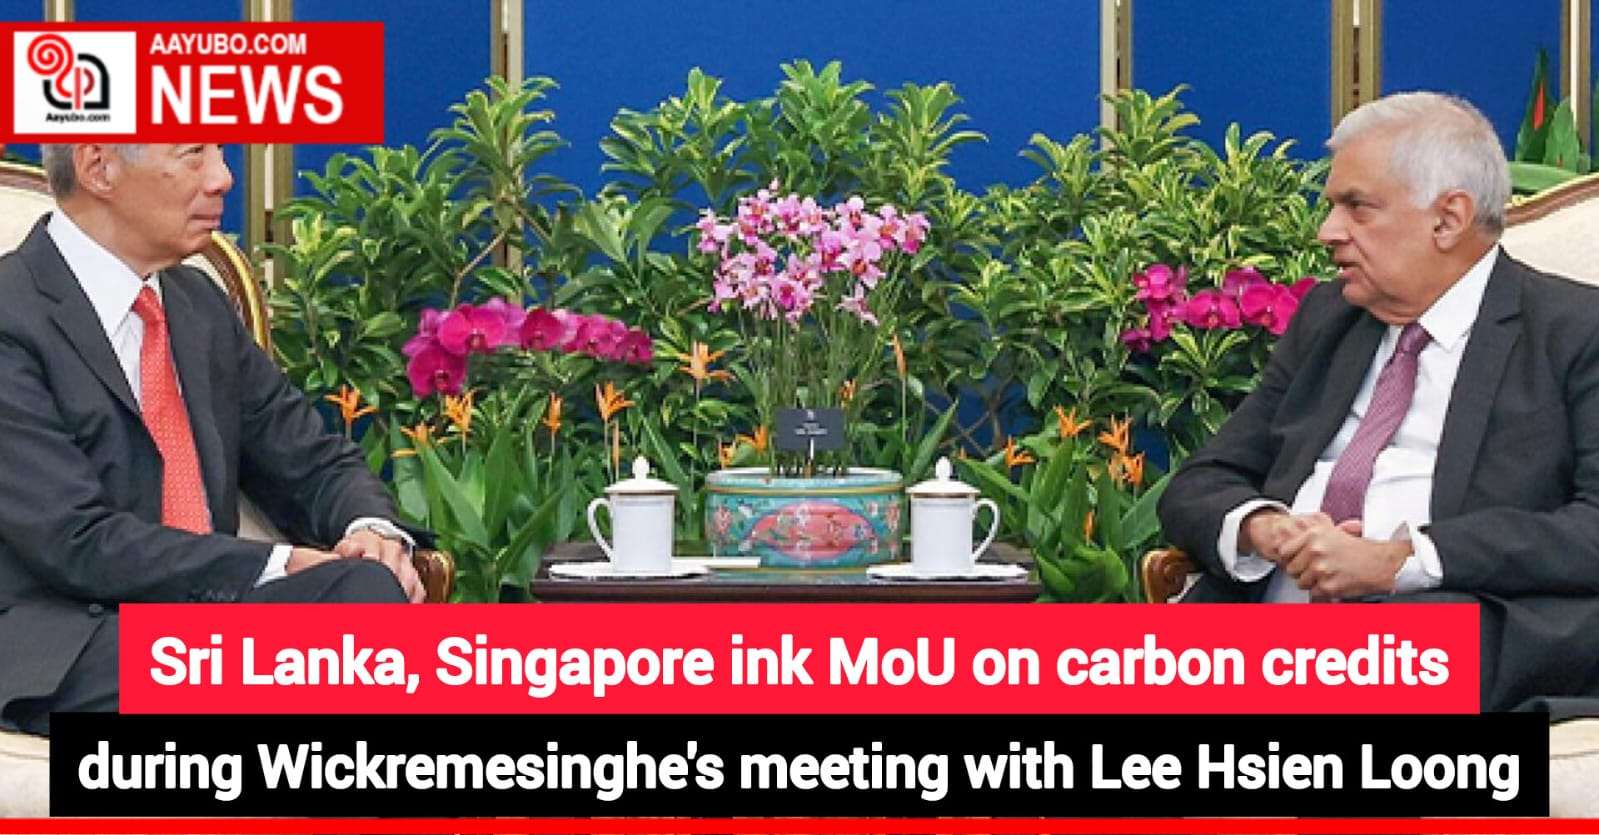 Sri Lanka, Singapore ink MoU on carbon credits during Wickremesinghe's meeting with Lee Hsien Loong